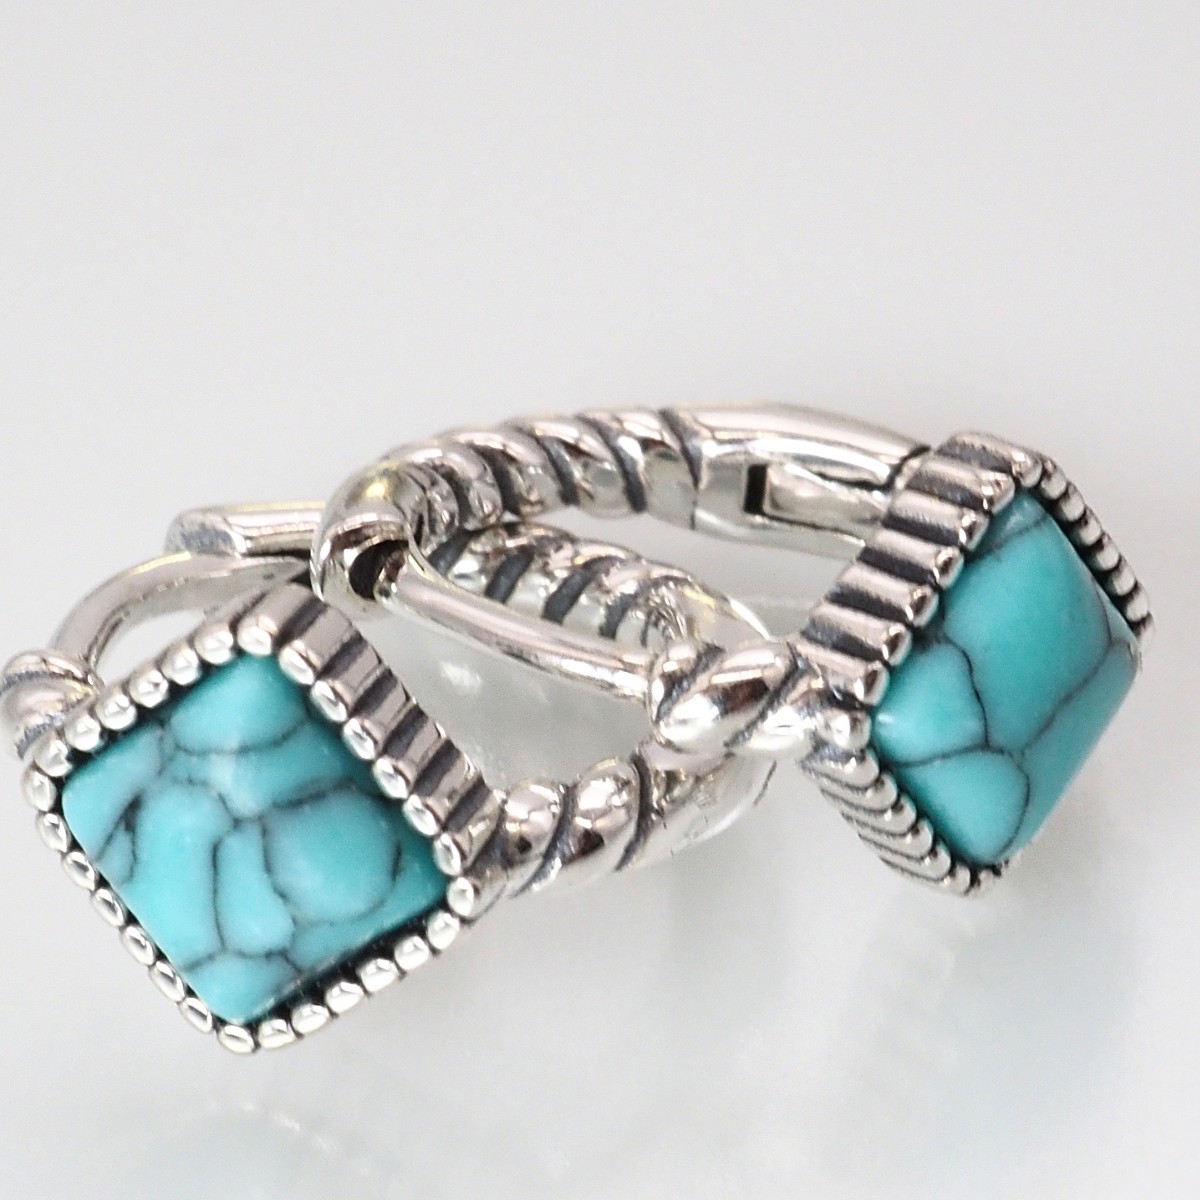  turquoise sterling silver square earrings 